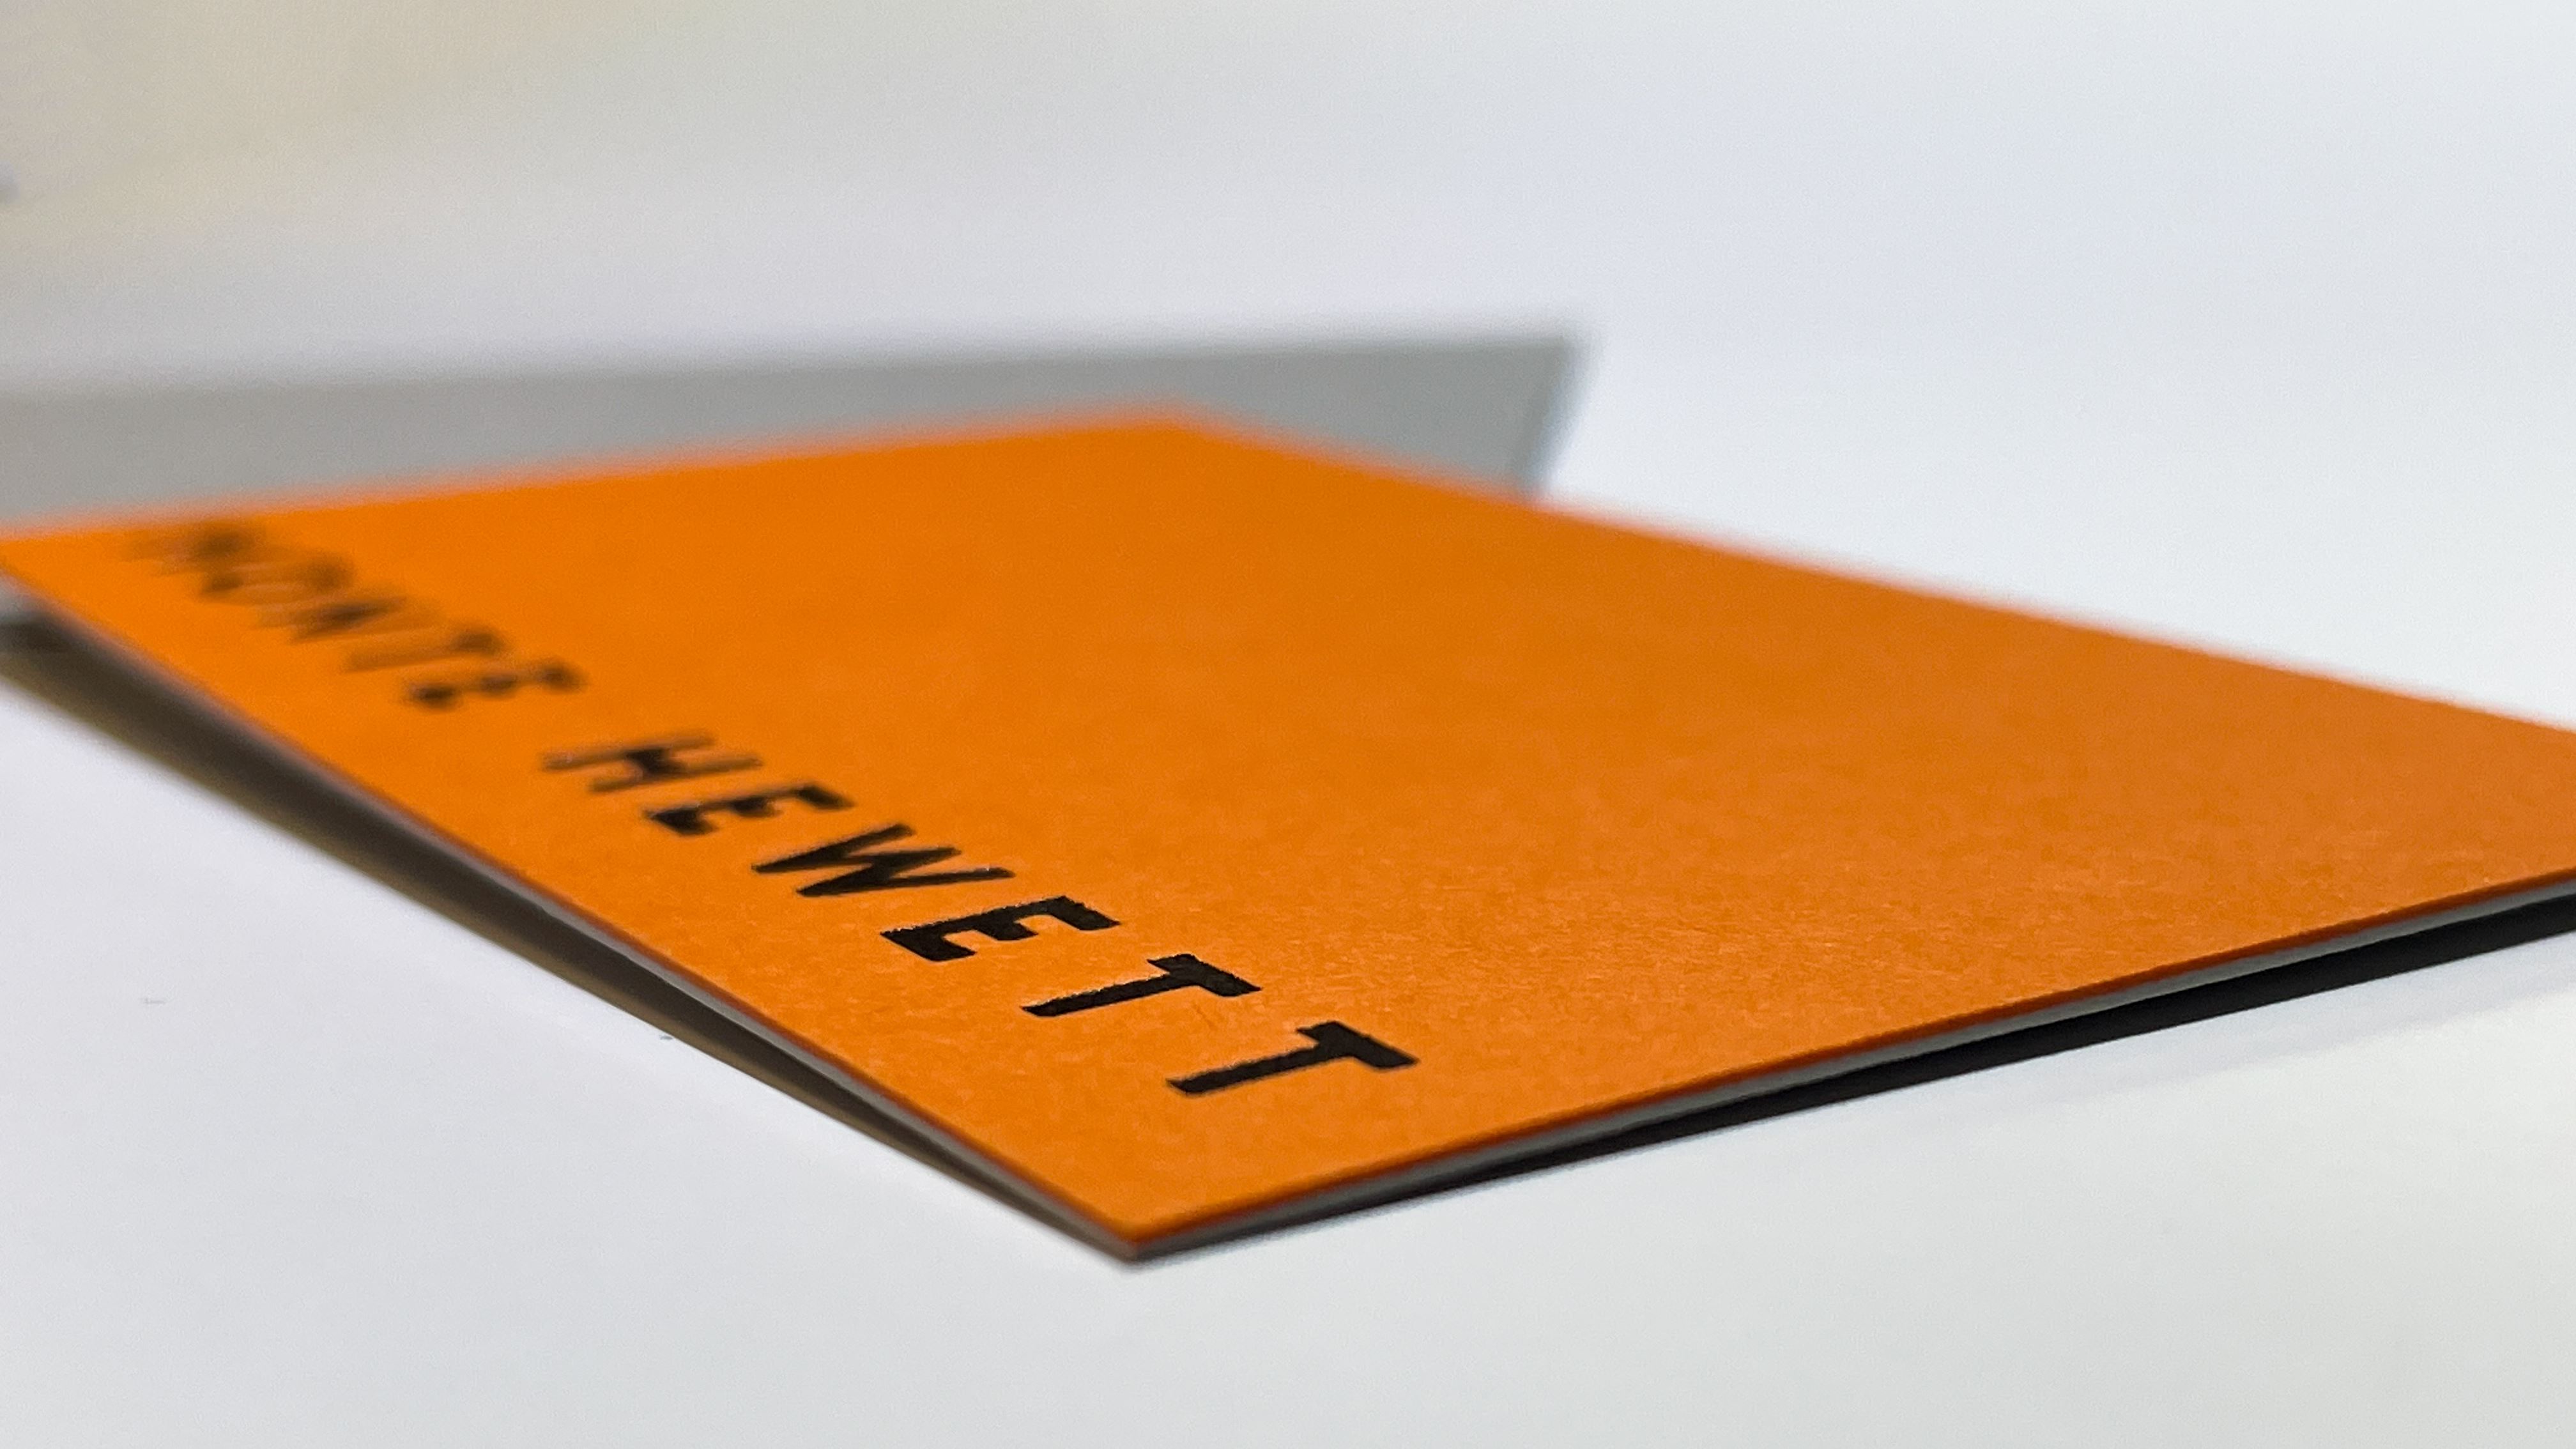 A business card with the letterpress design.